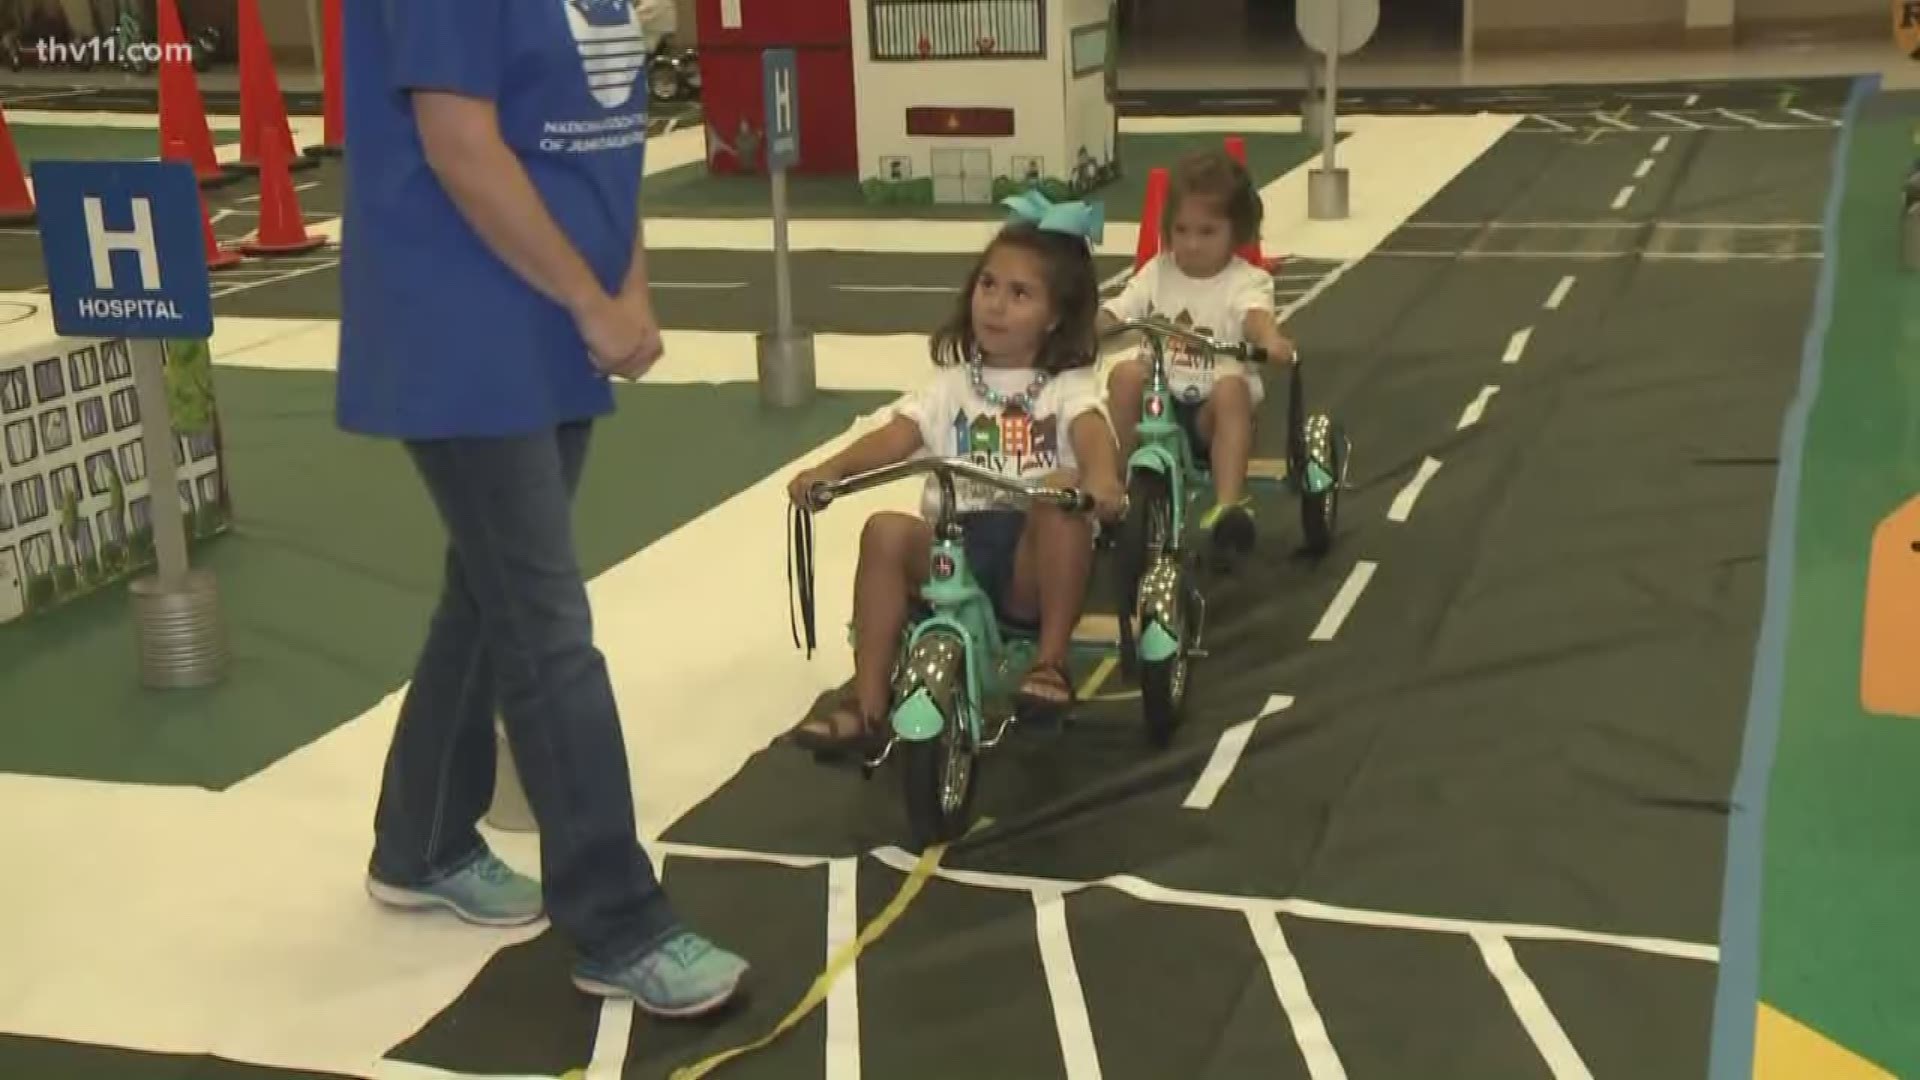 The citizens of Safety Town learn the rules of the road at a young age.